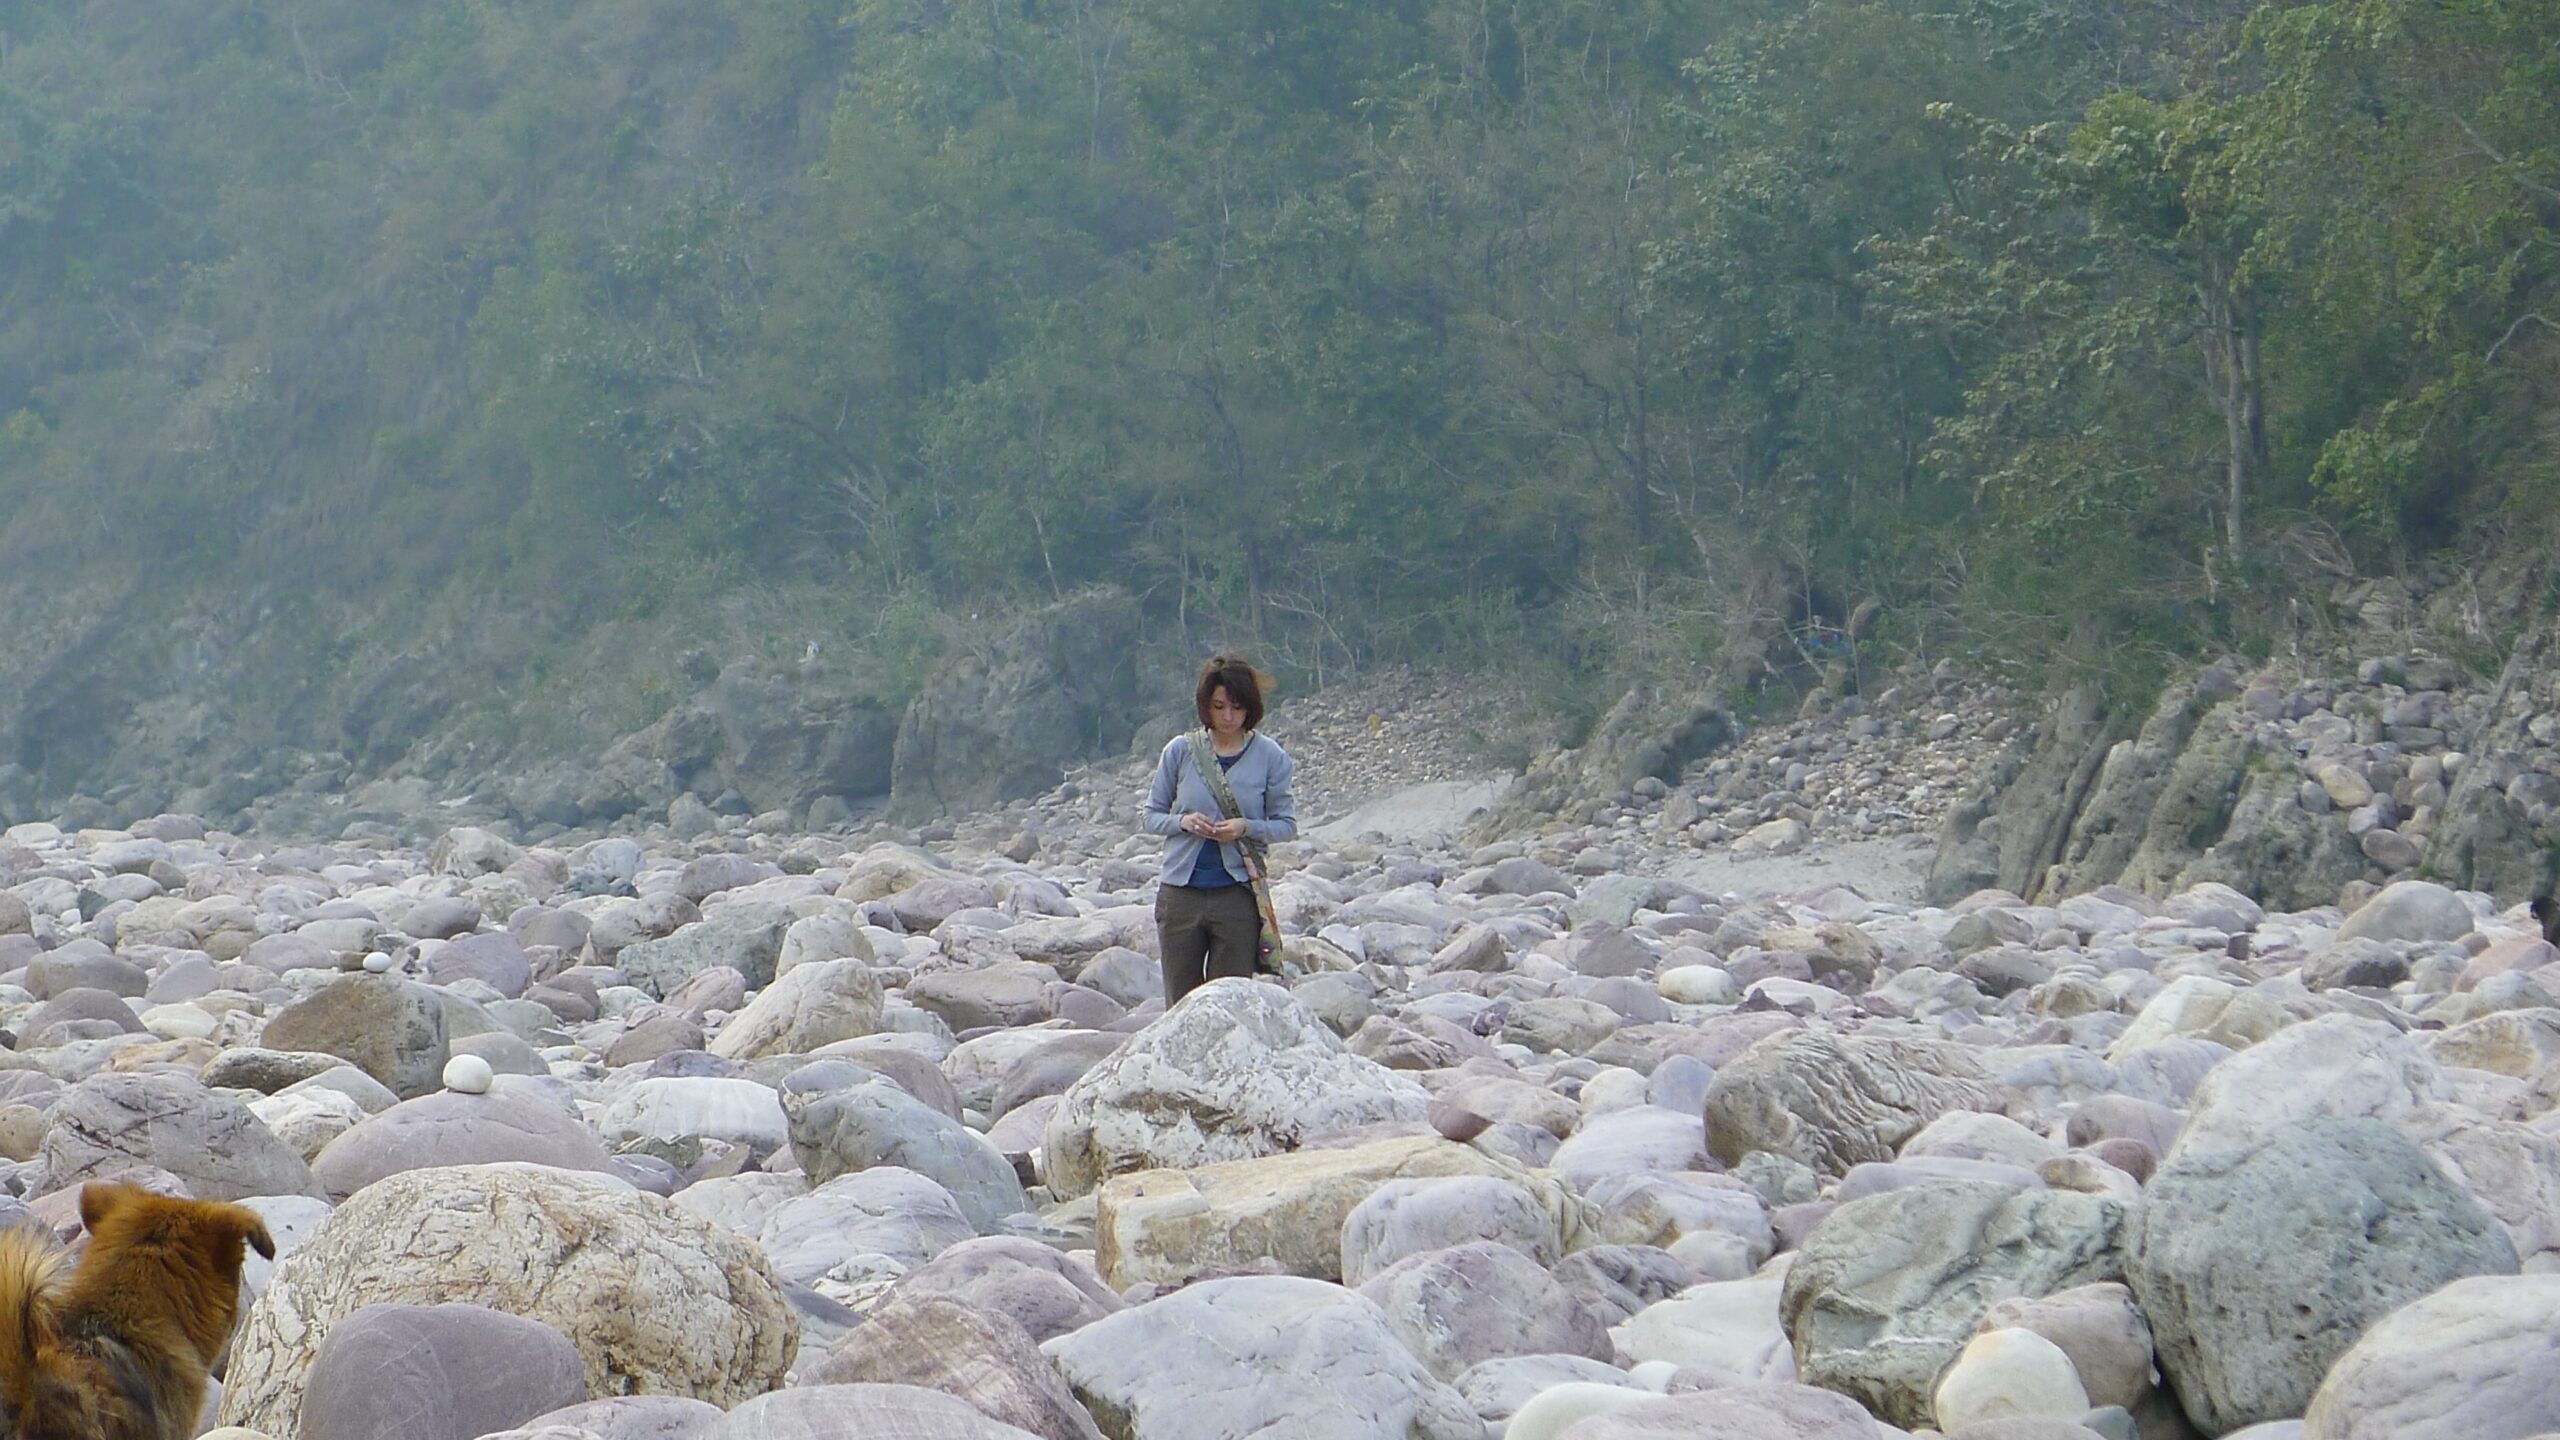 Photo of Lydia standing in the dry river bead of a gorge (Ganges River) filled with large gray and pastel colored stones. Lydia is looking down at her hands, holding something small. Misty green trees cover a steep embankment and a small, reddish-brown dog faces her from the bottom left corner.